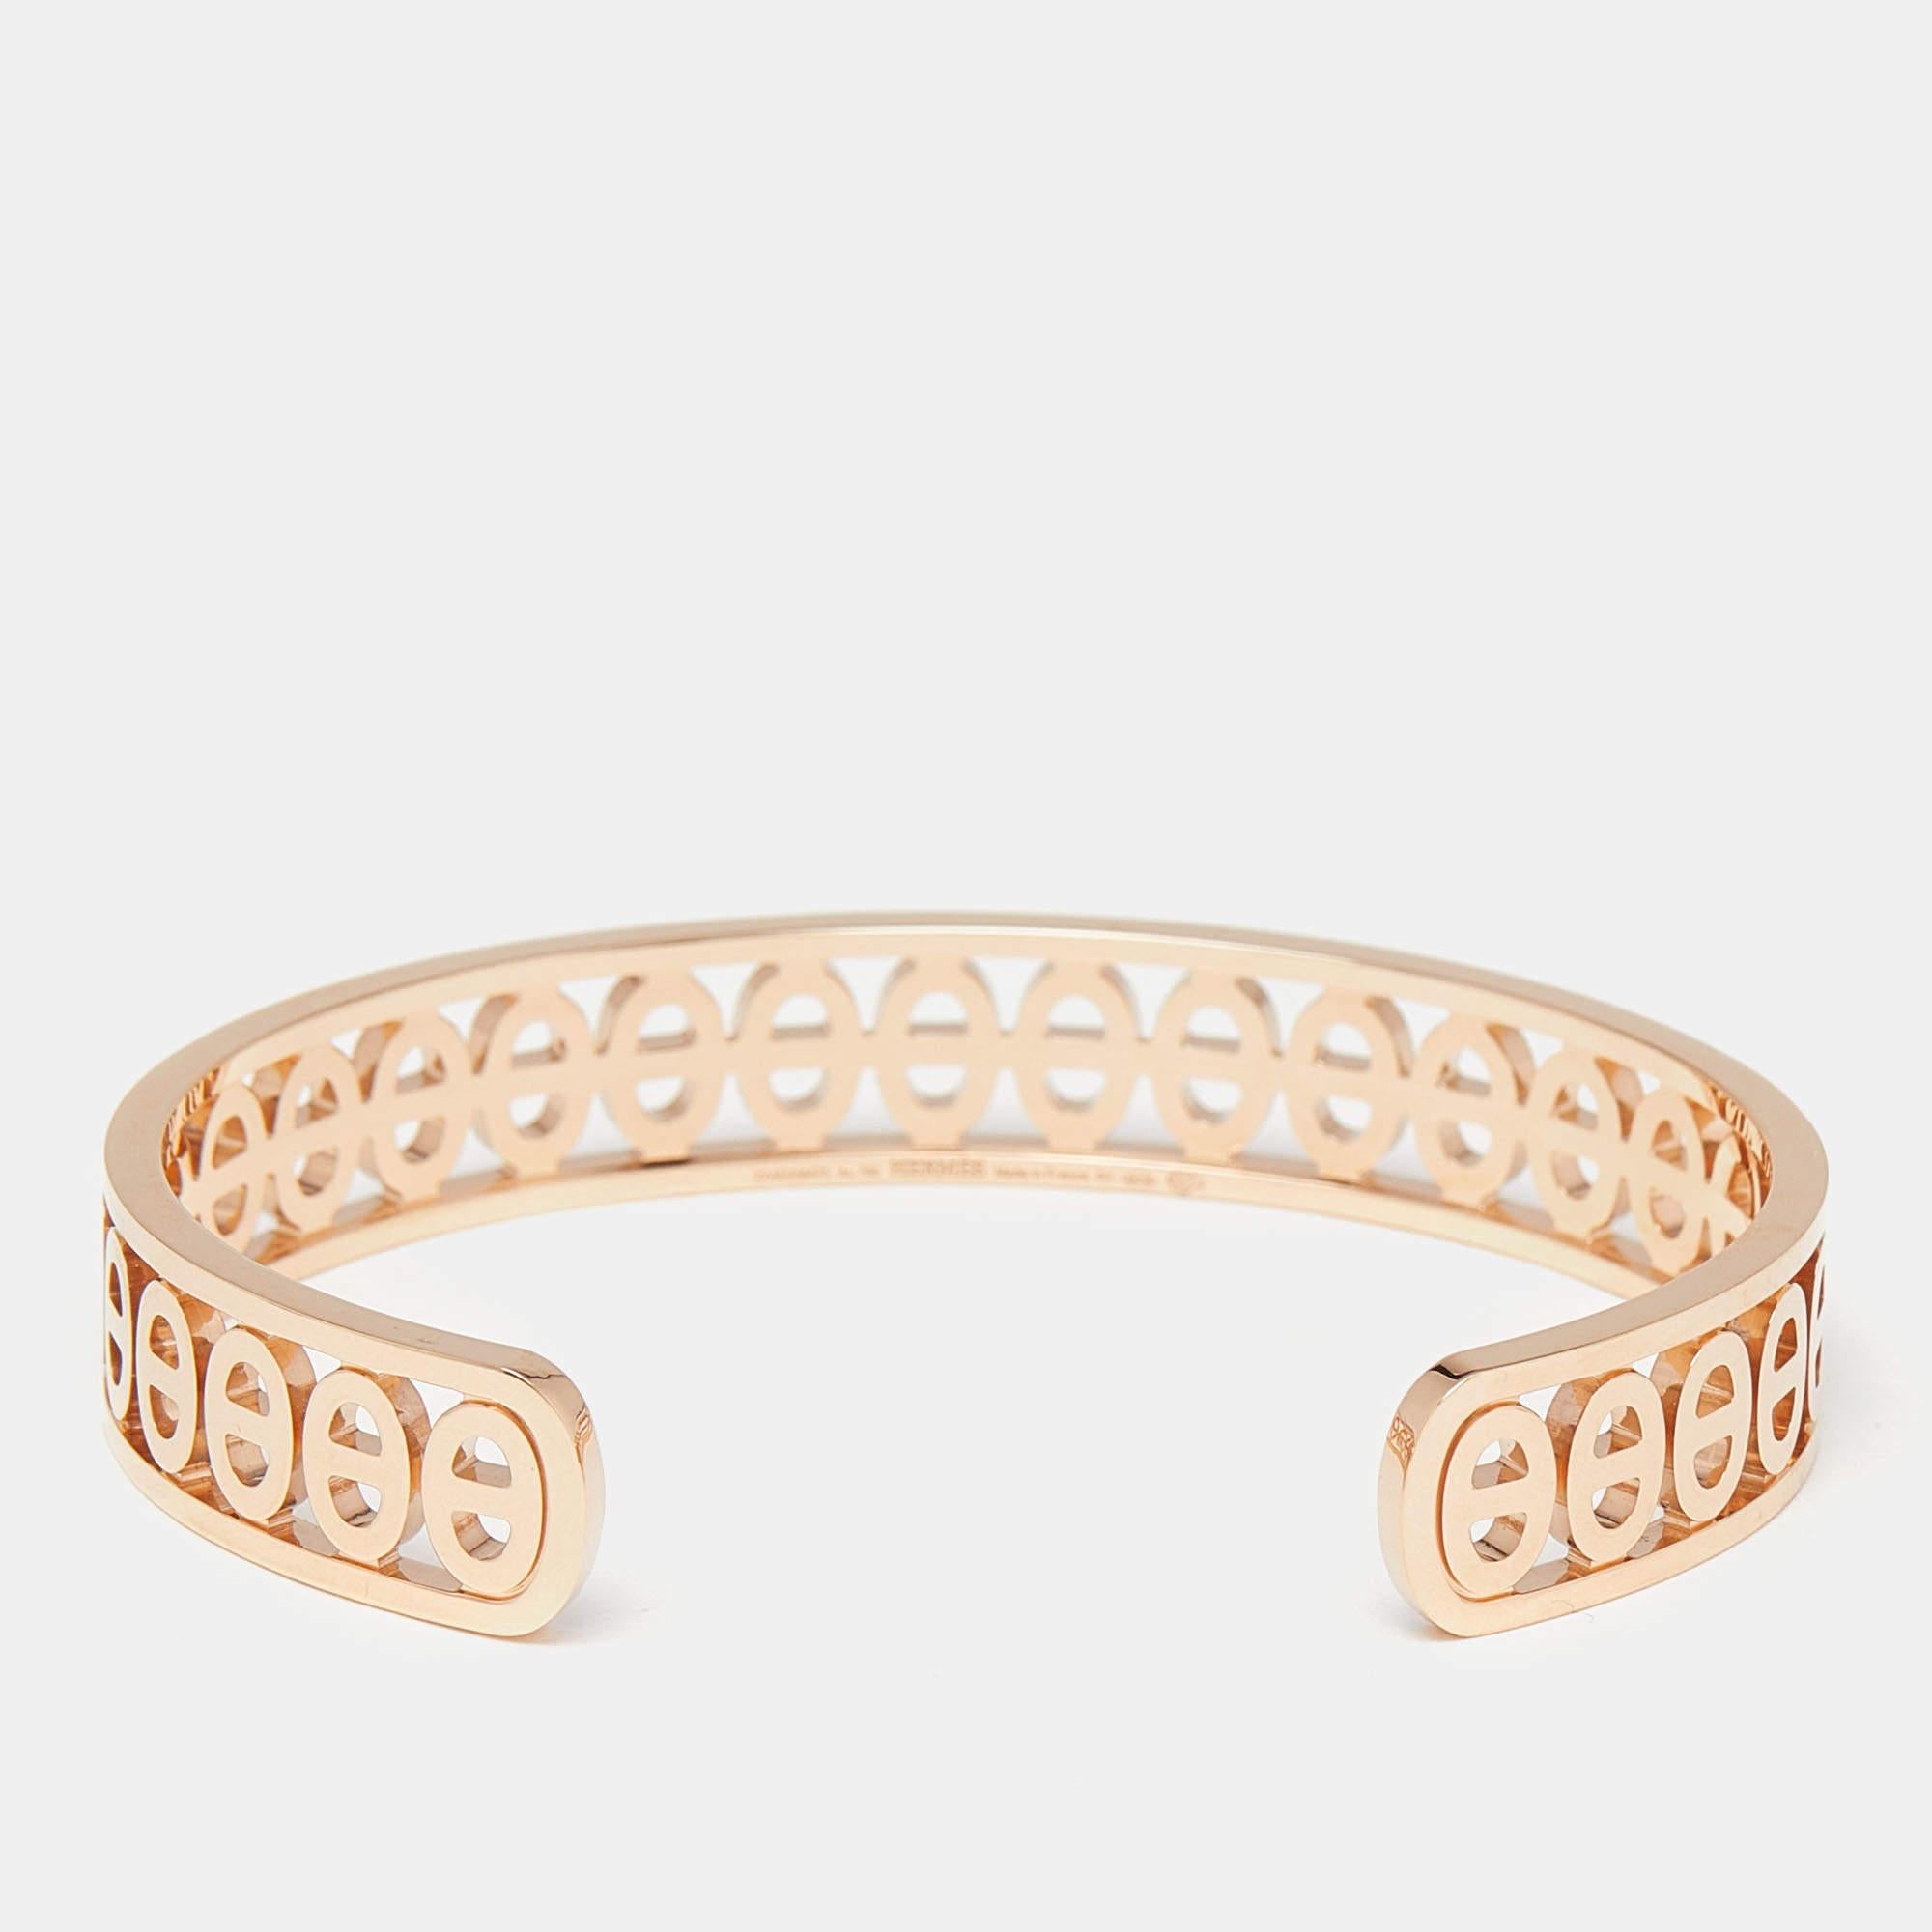 The choice of the best materials coupled with heritage artisanship makes this Hermes Chaine D'ancre Divine bracelet a creation worth cherishing. It sits gracefully on any wrist.

Includes
Original Box, Original Case, Authenticity Card